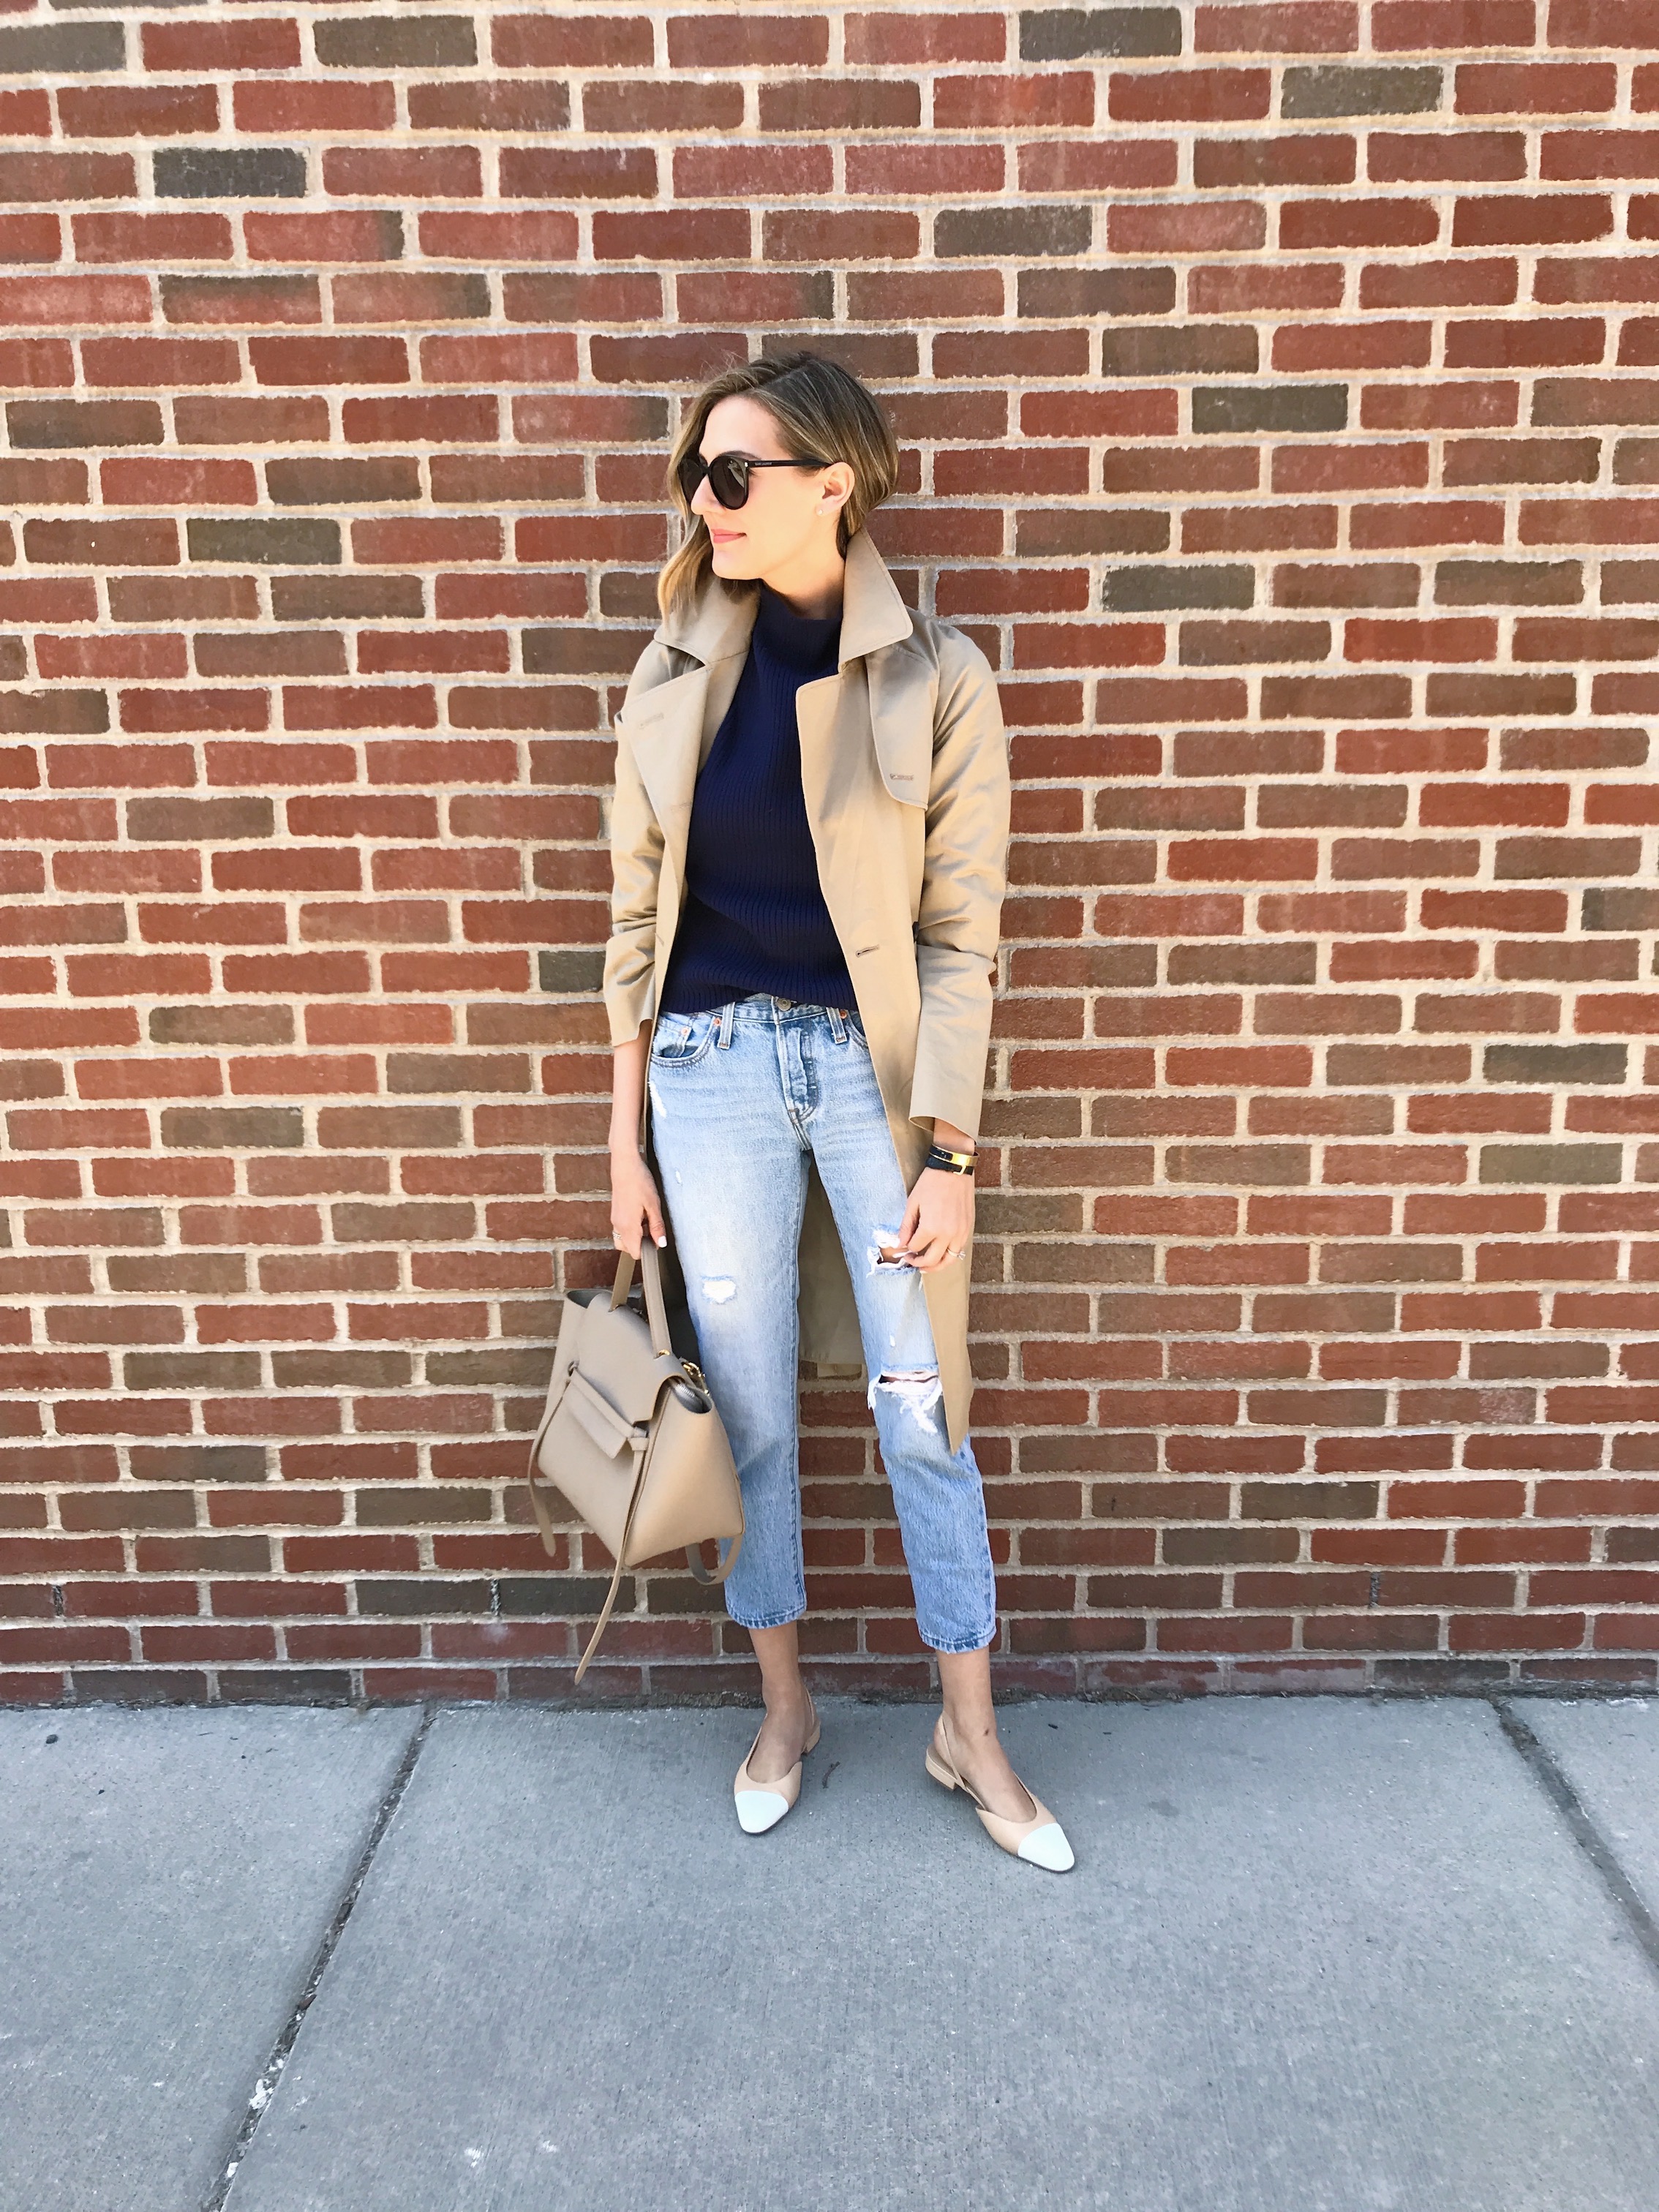 classic trench coat outfit chanel flats